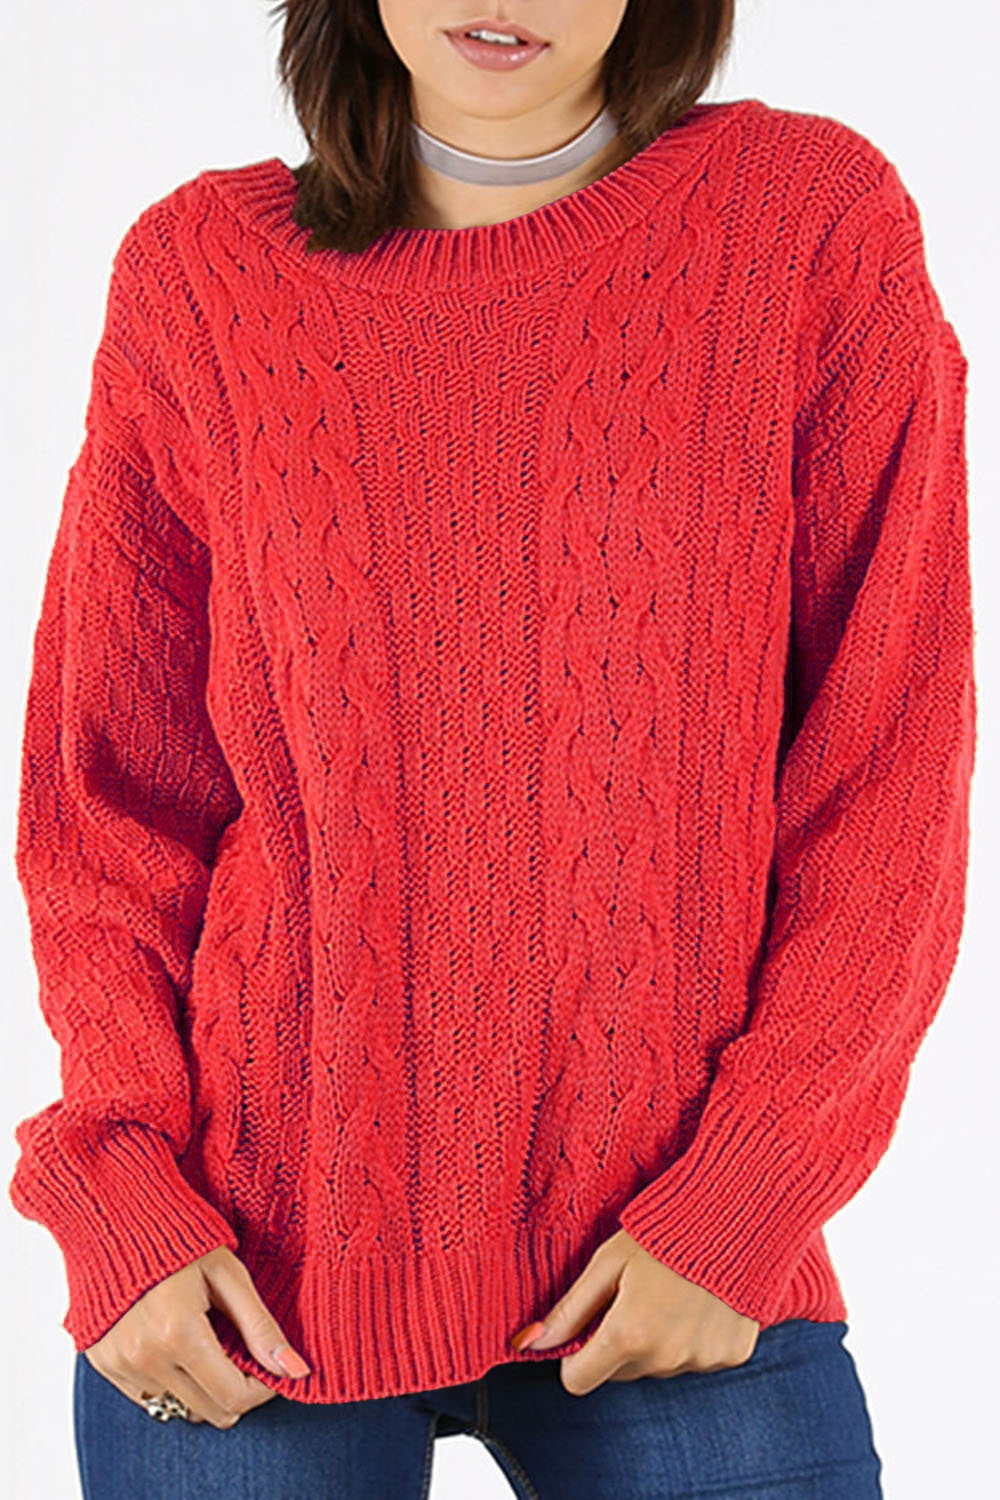 Long Sleeve Burgundy Cable Knit Jumper